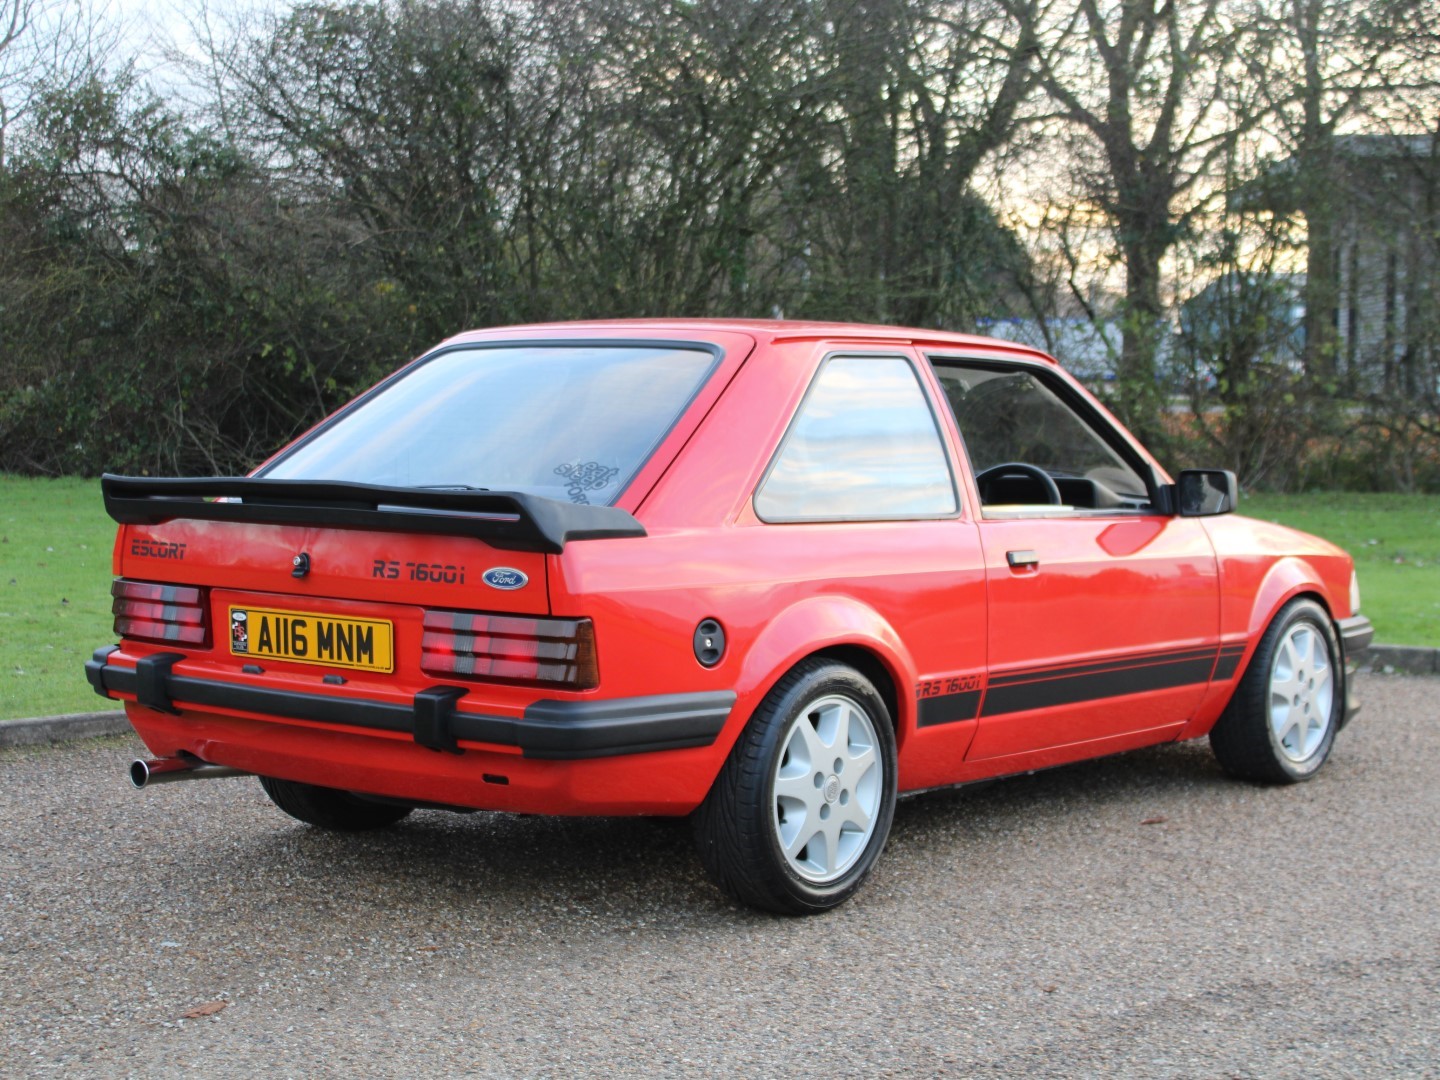 1983 Ford Escort RS 1600i - Image 4 of 24